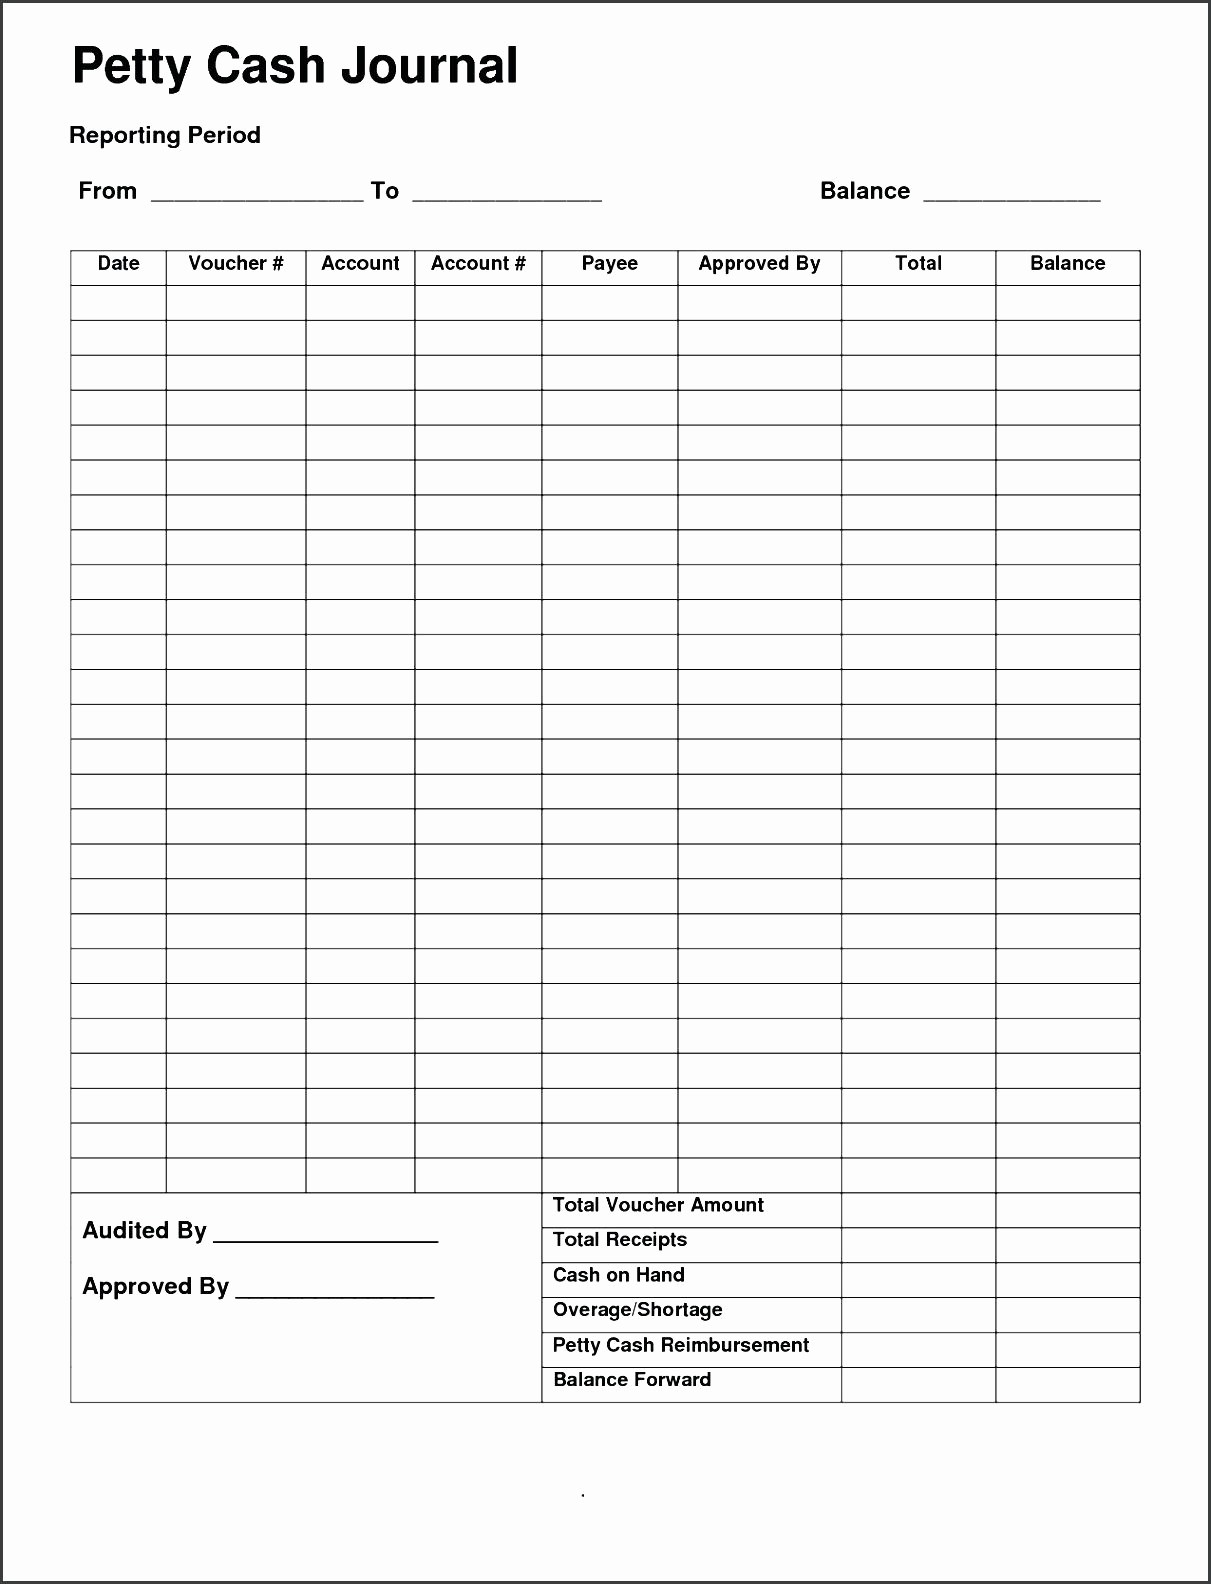 Petty Cash Request form Template Inspirational Petty Cash Claim form Template